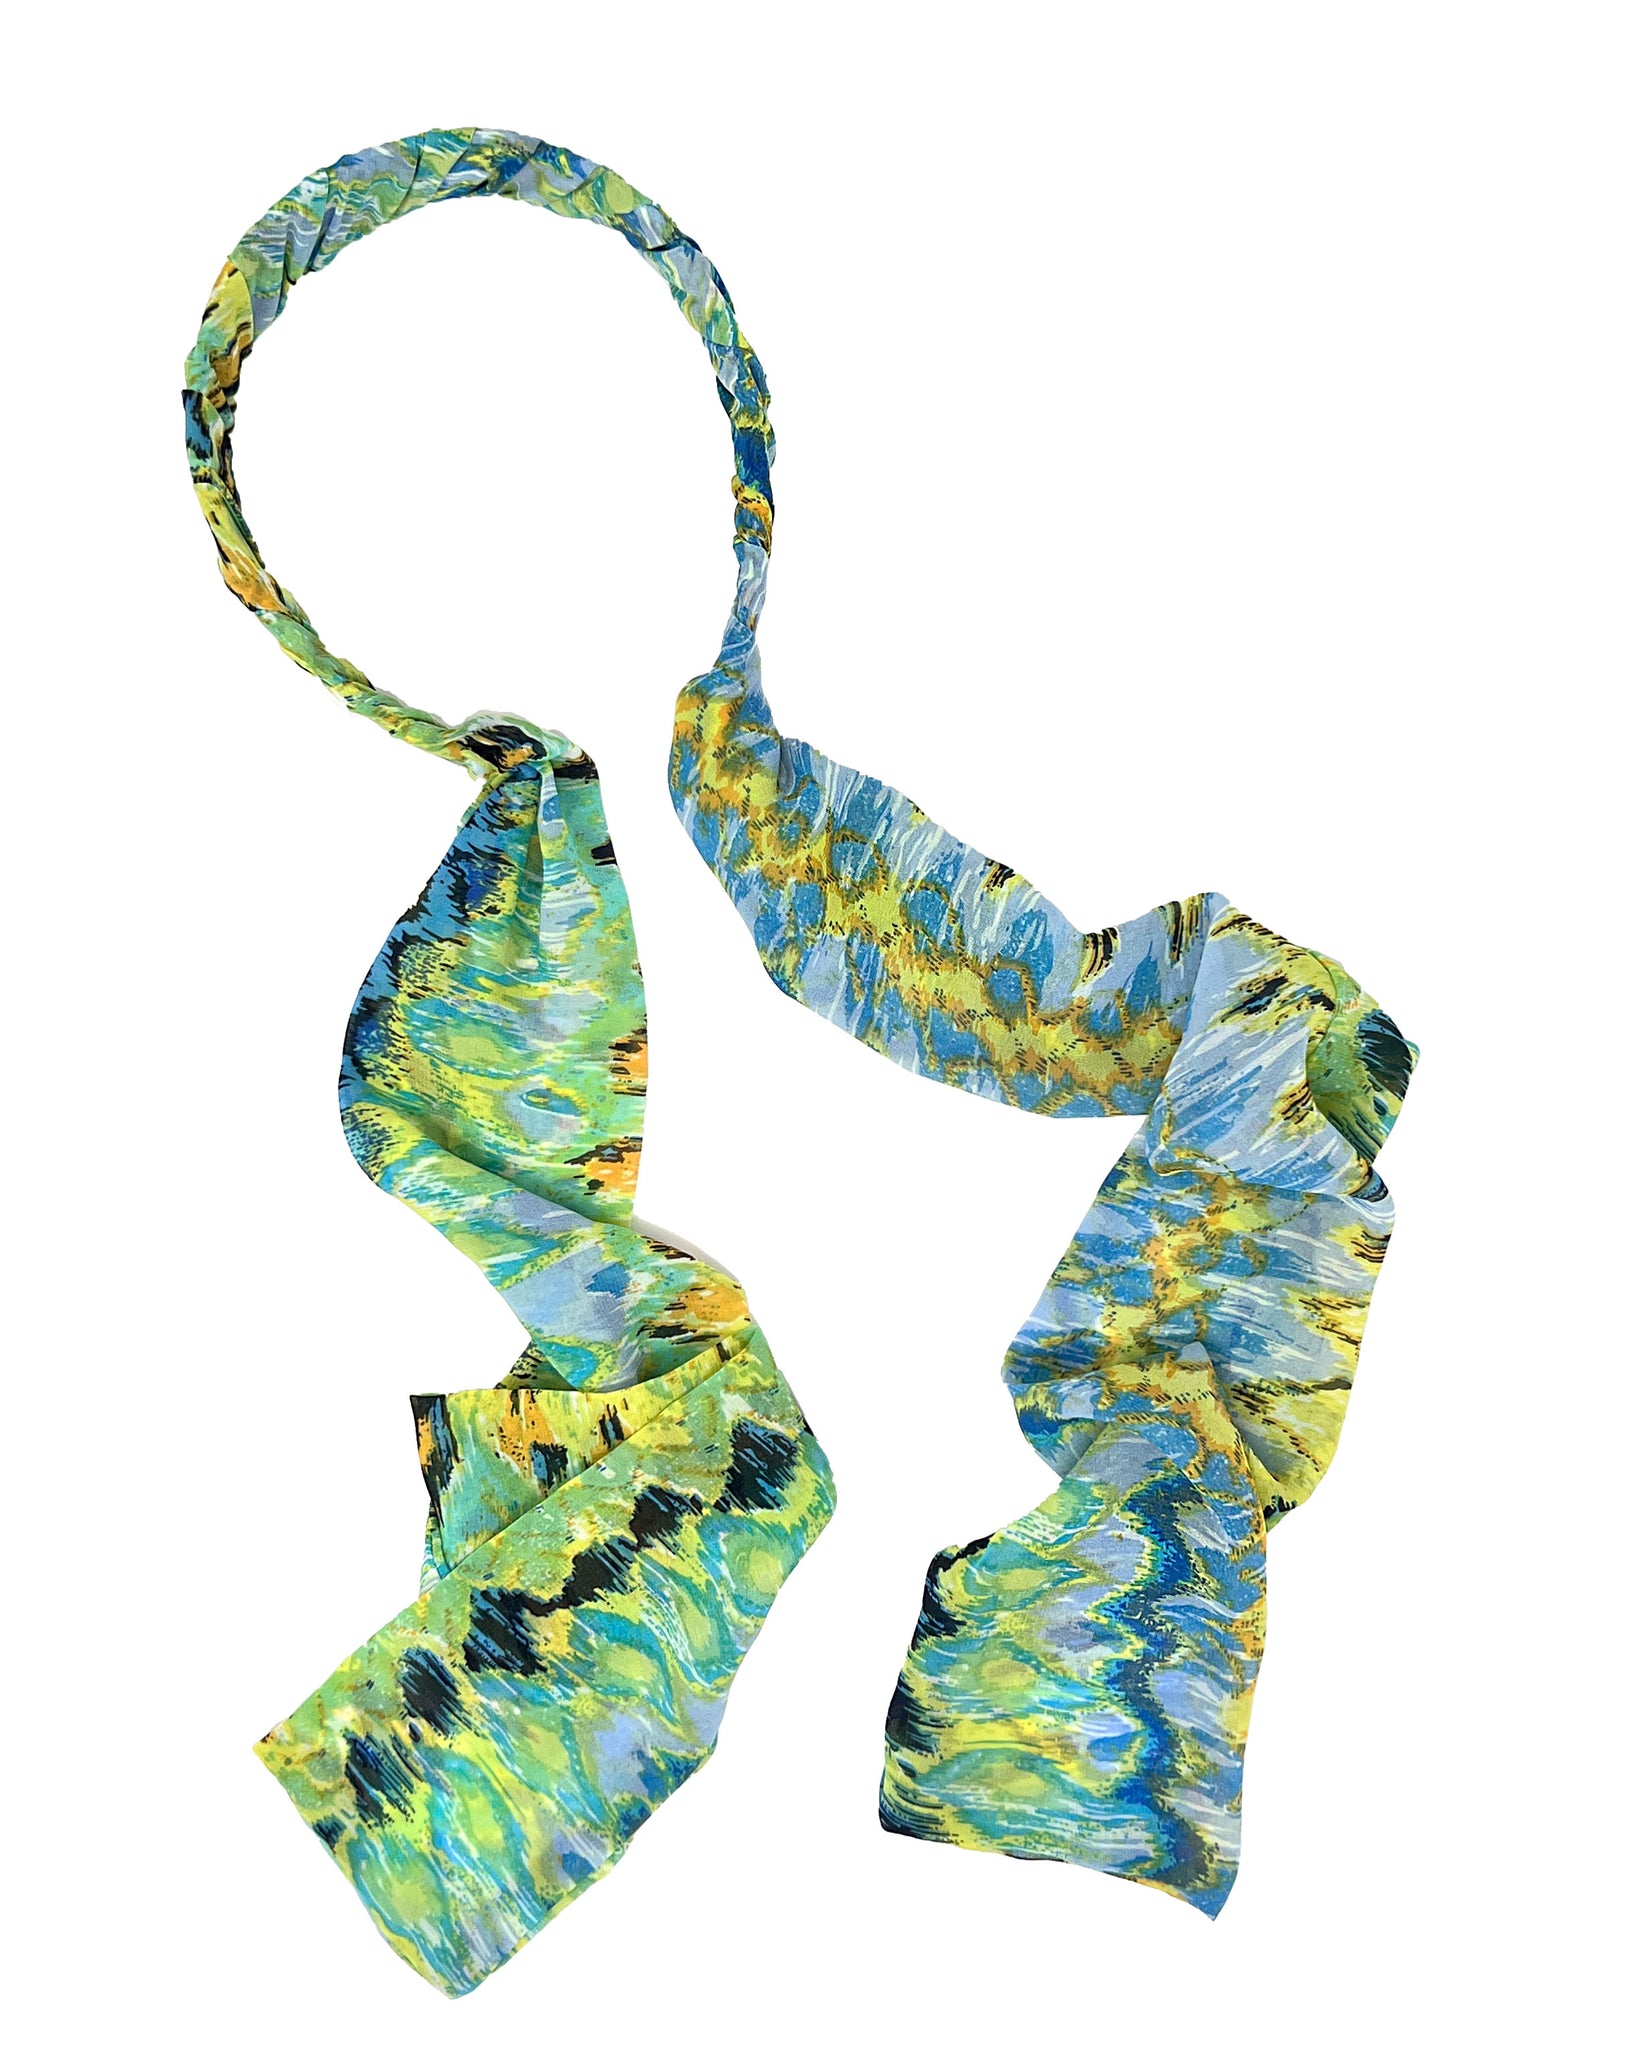 Green georgette foulard hairband with ethnical pattern